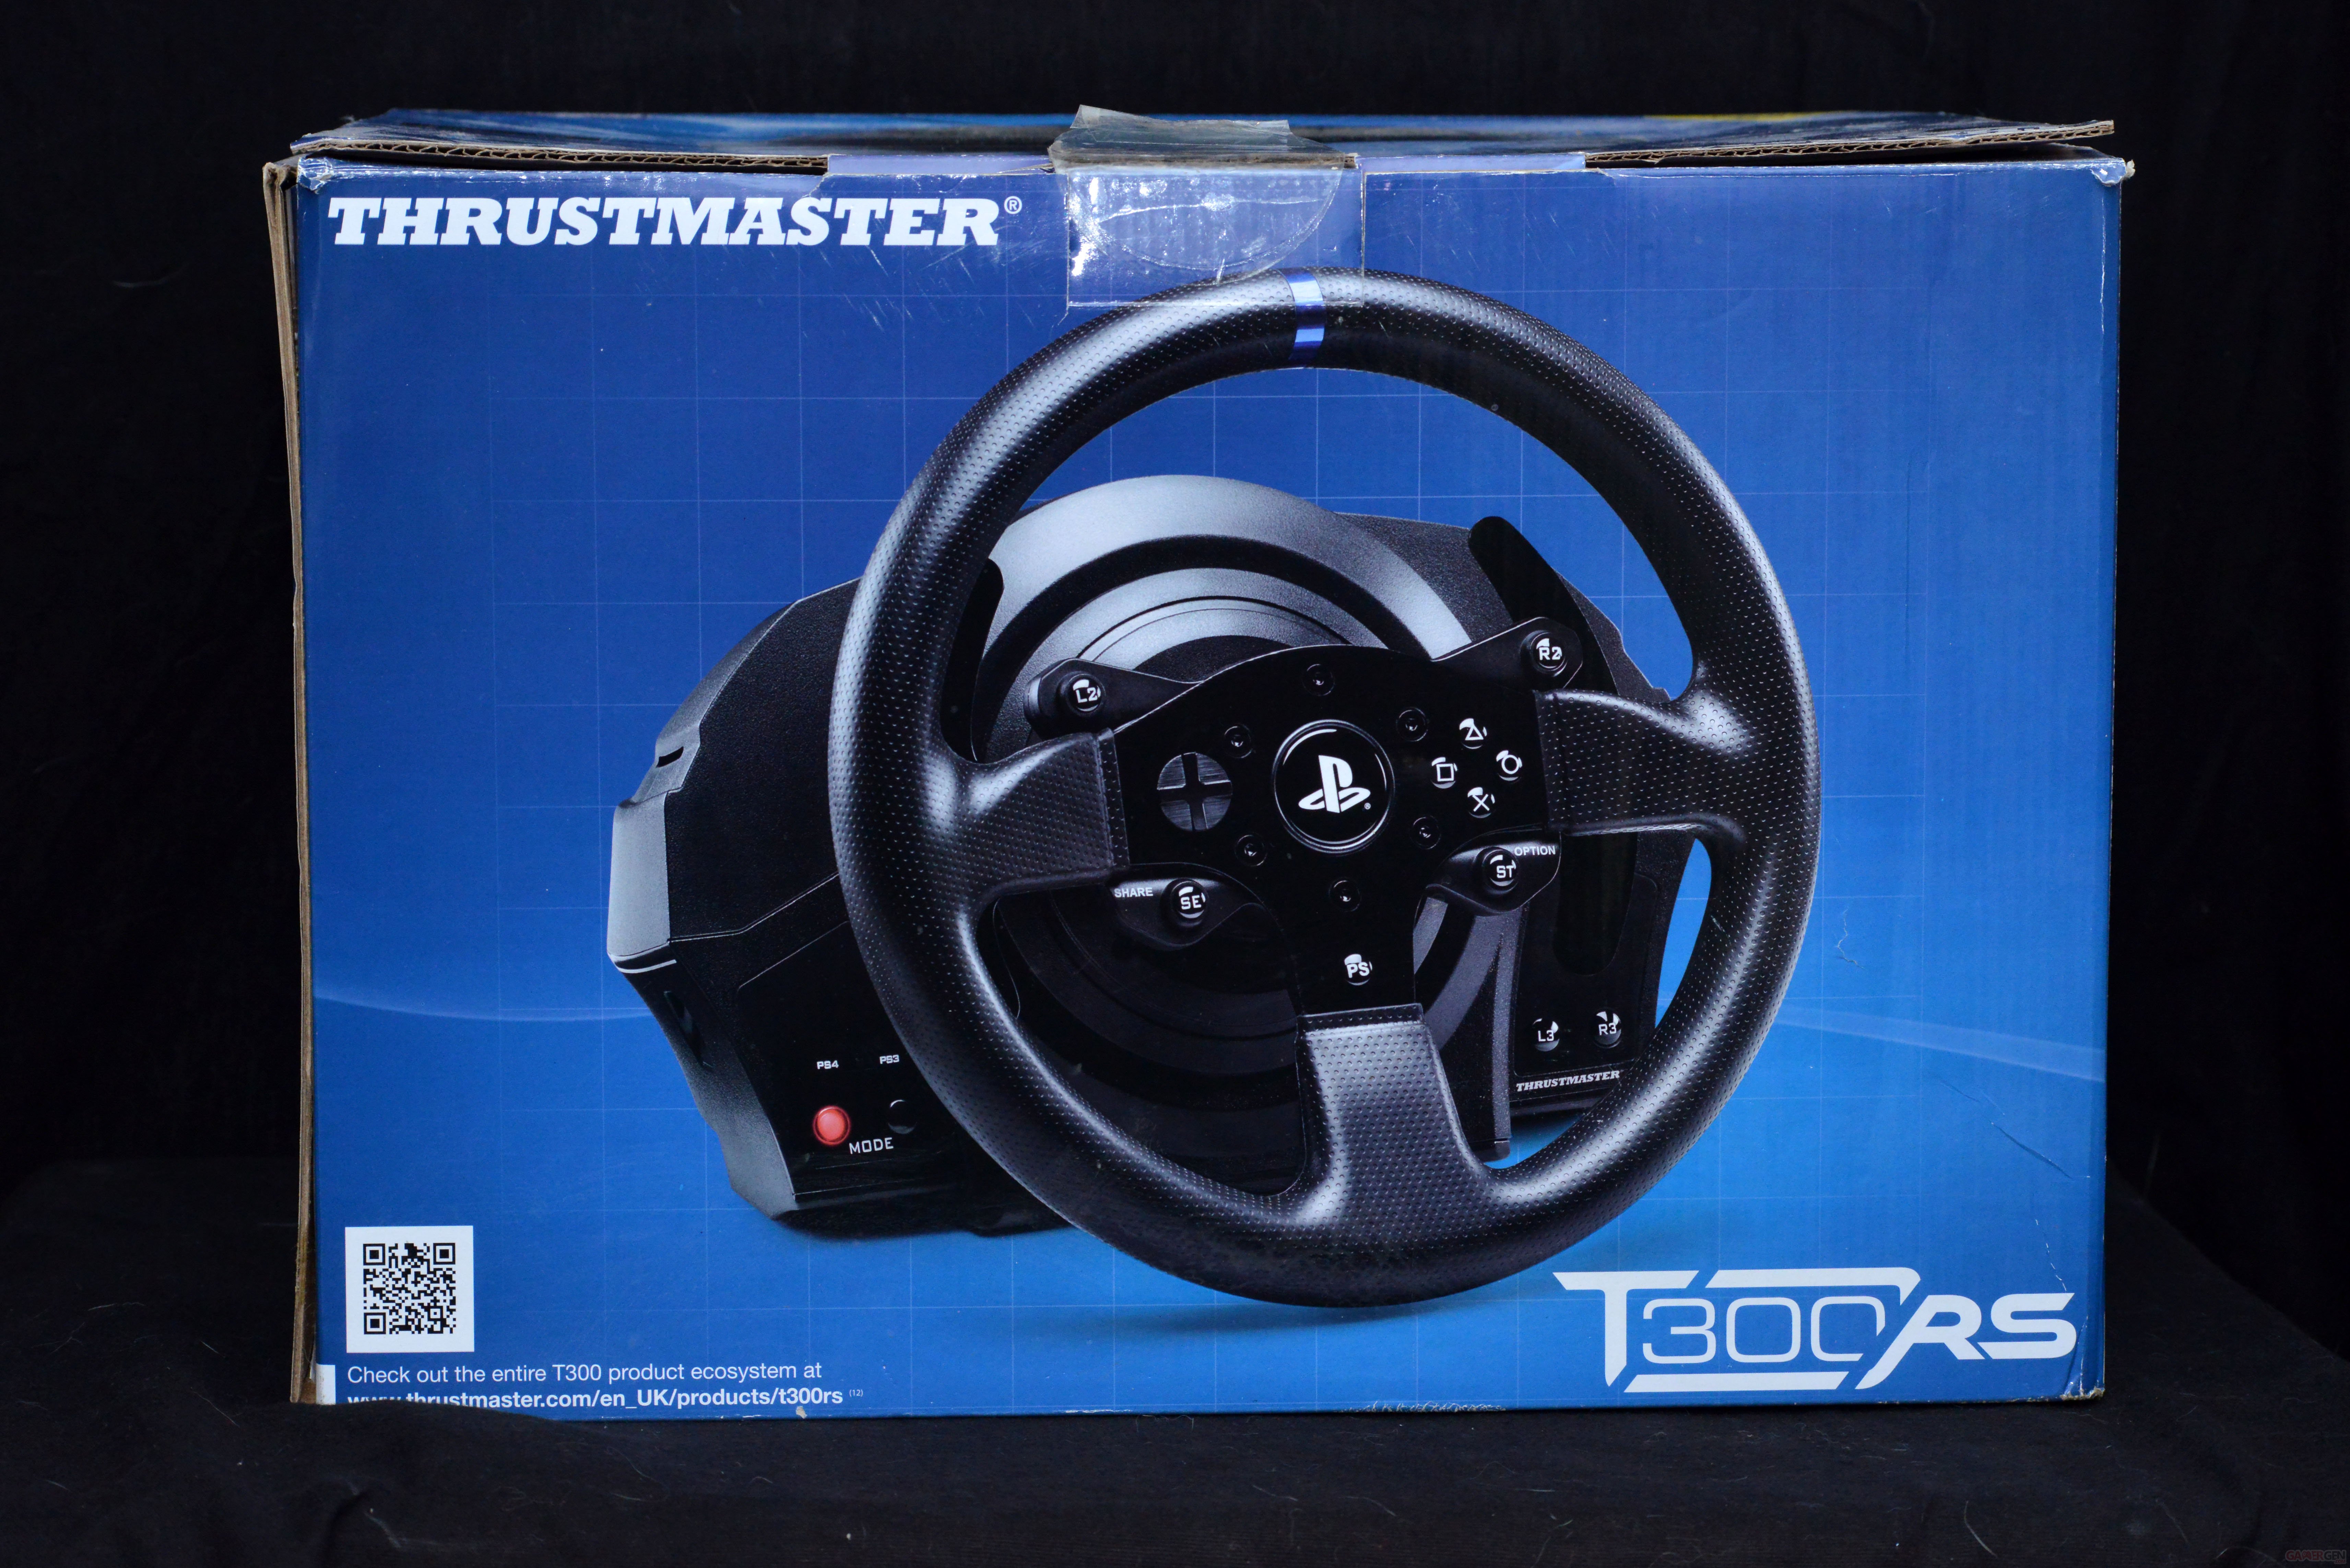 Unboxing Volante Thrustmaster T300RS 